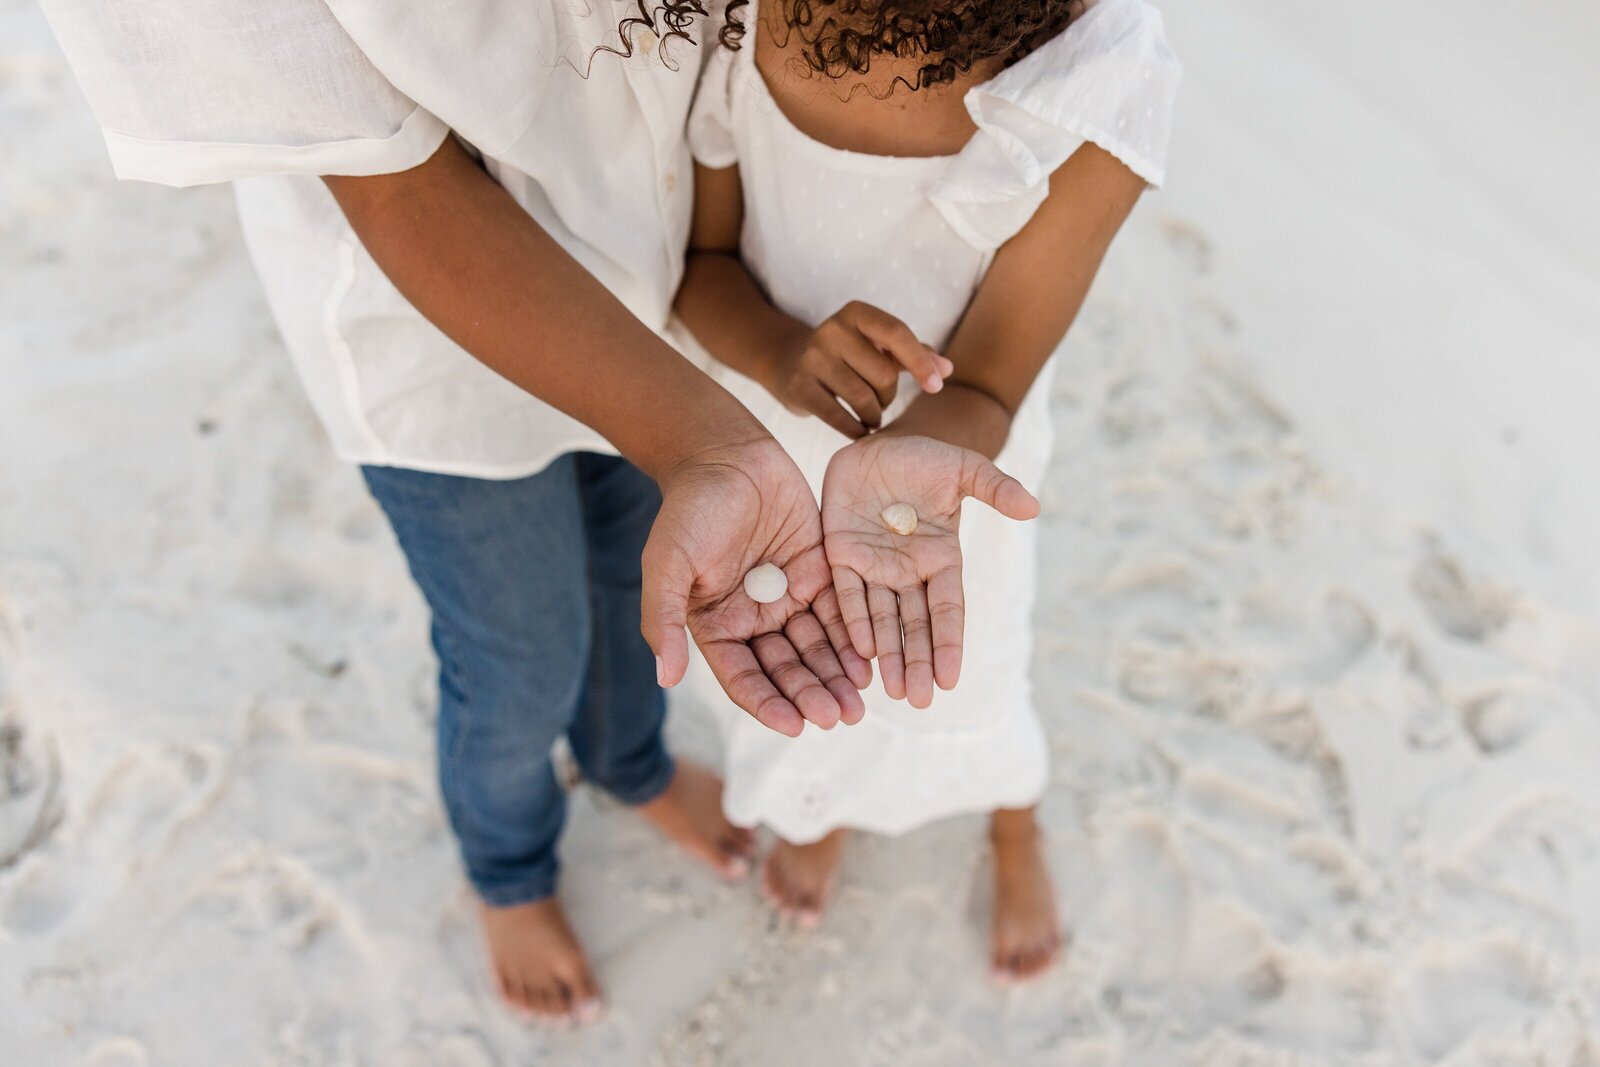 Seashells found on Pensacola Beach by brother and sister during family photo session.